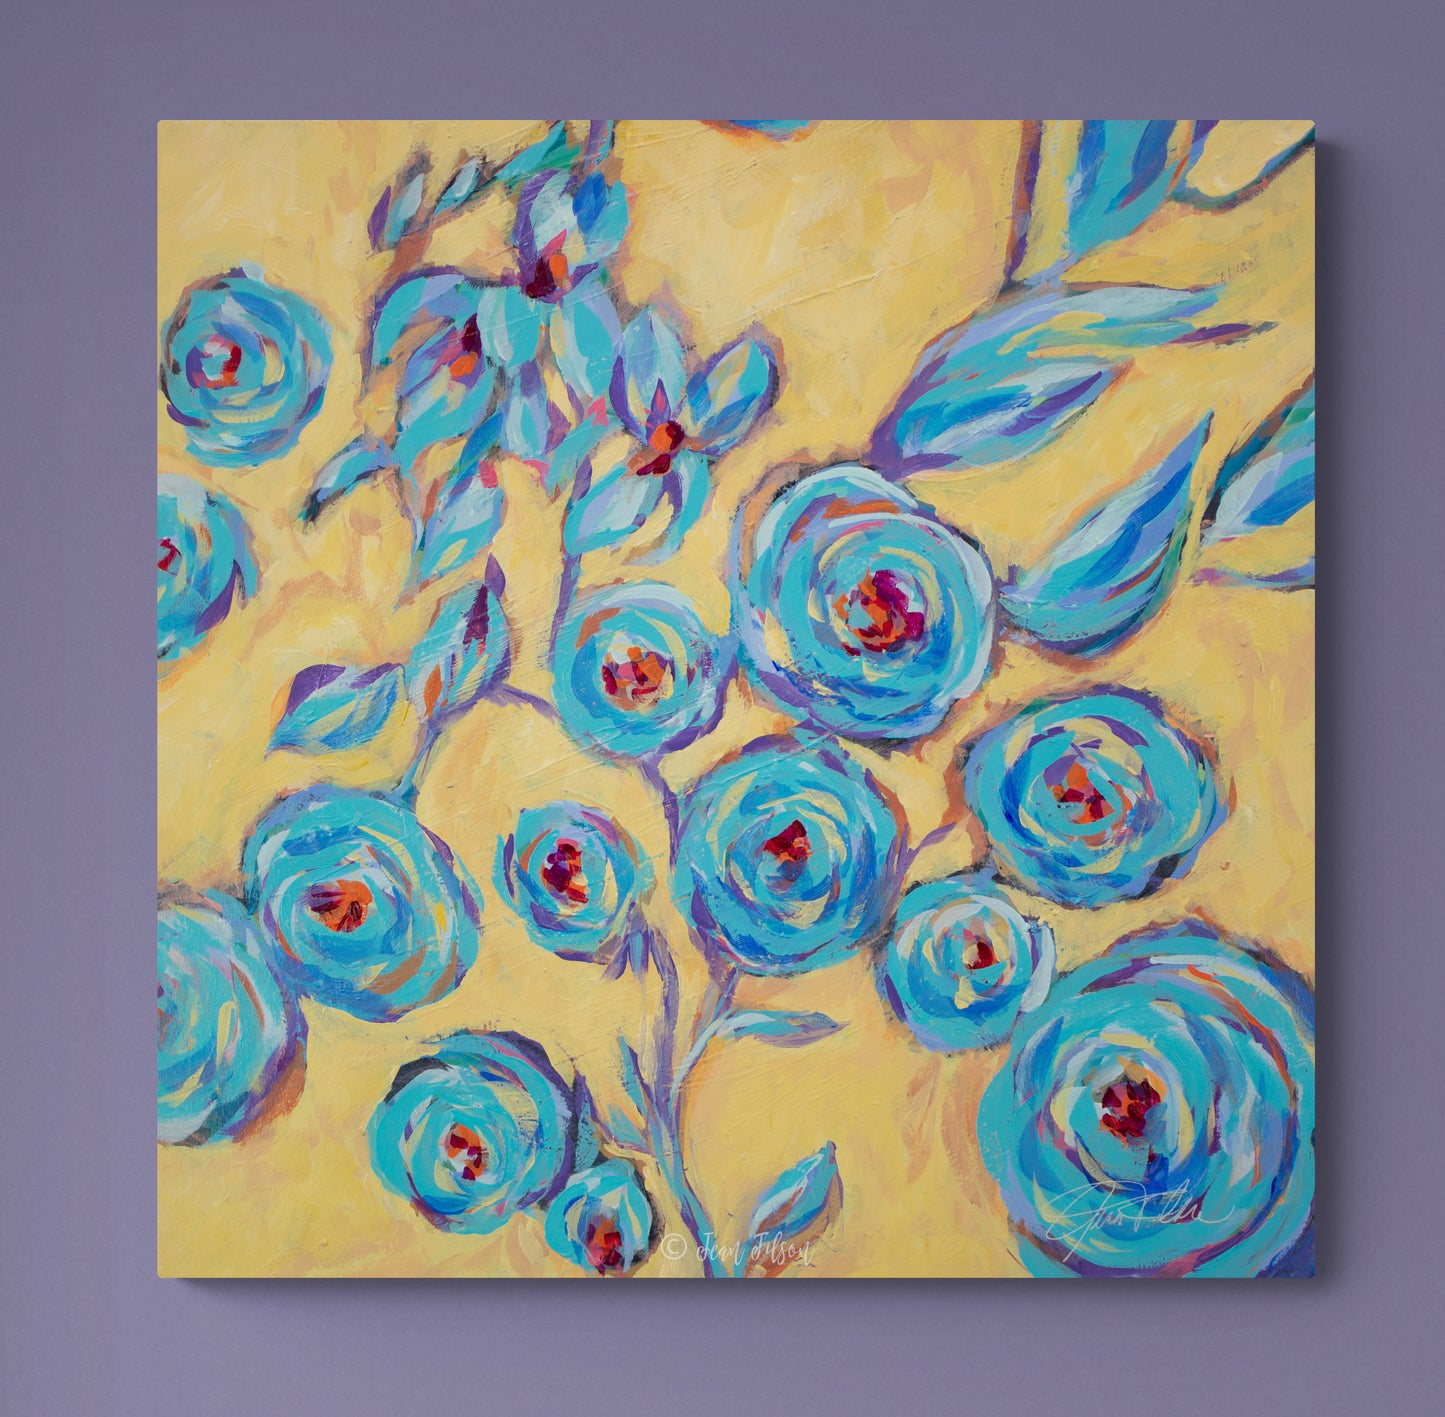 SUMMER LOVE, Original abstract canvas painting for sale, Abstract Art floral